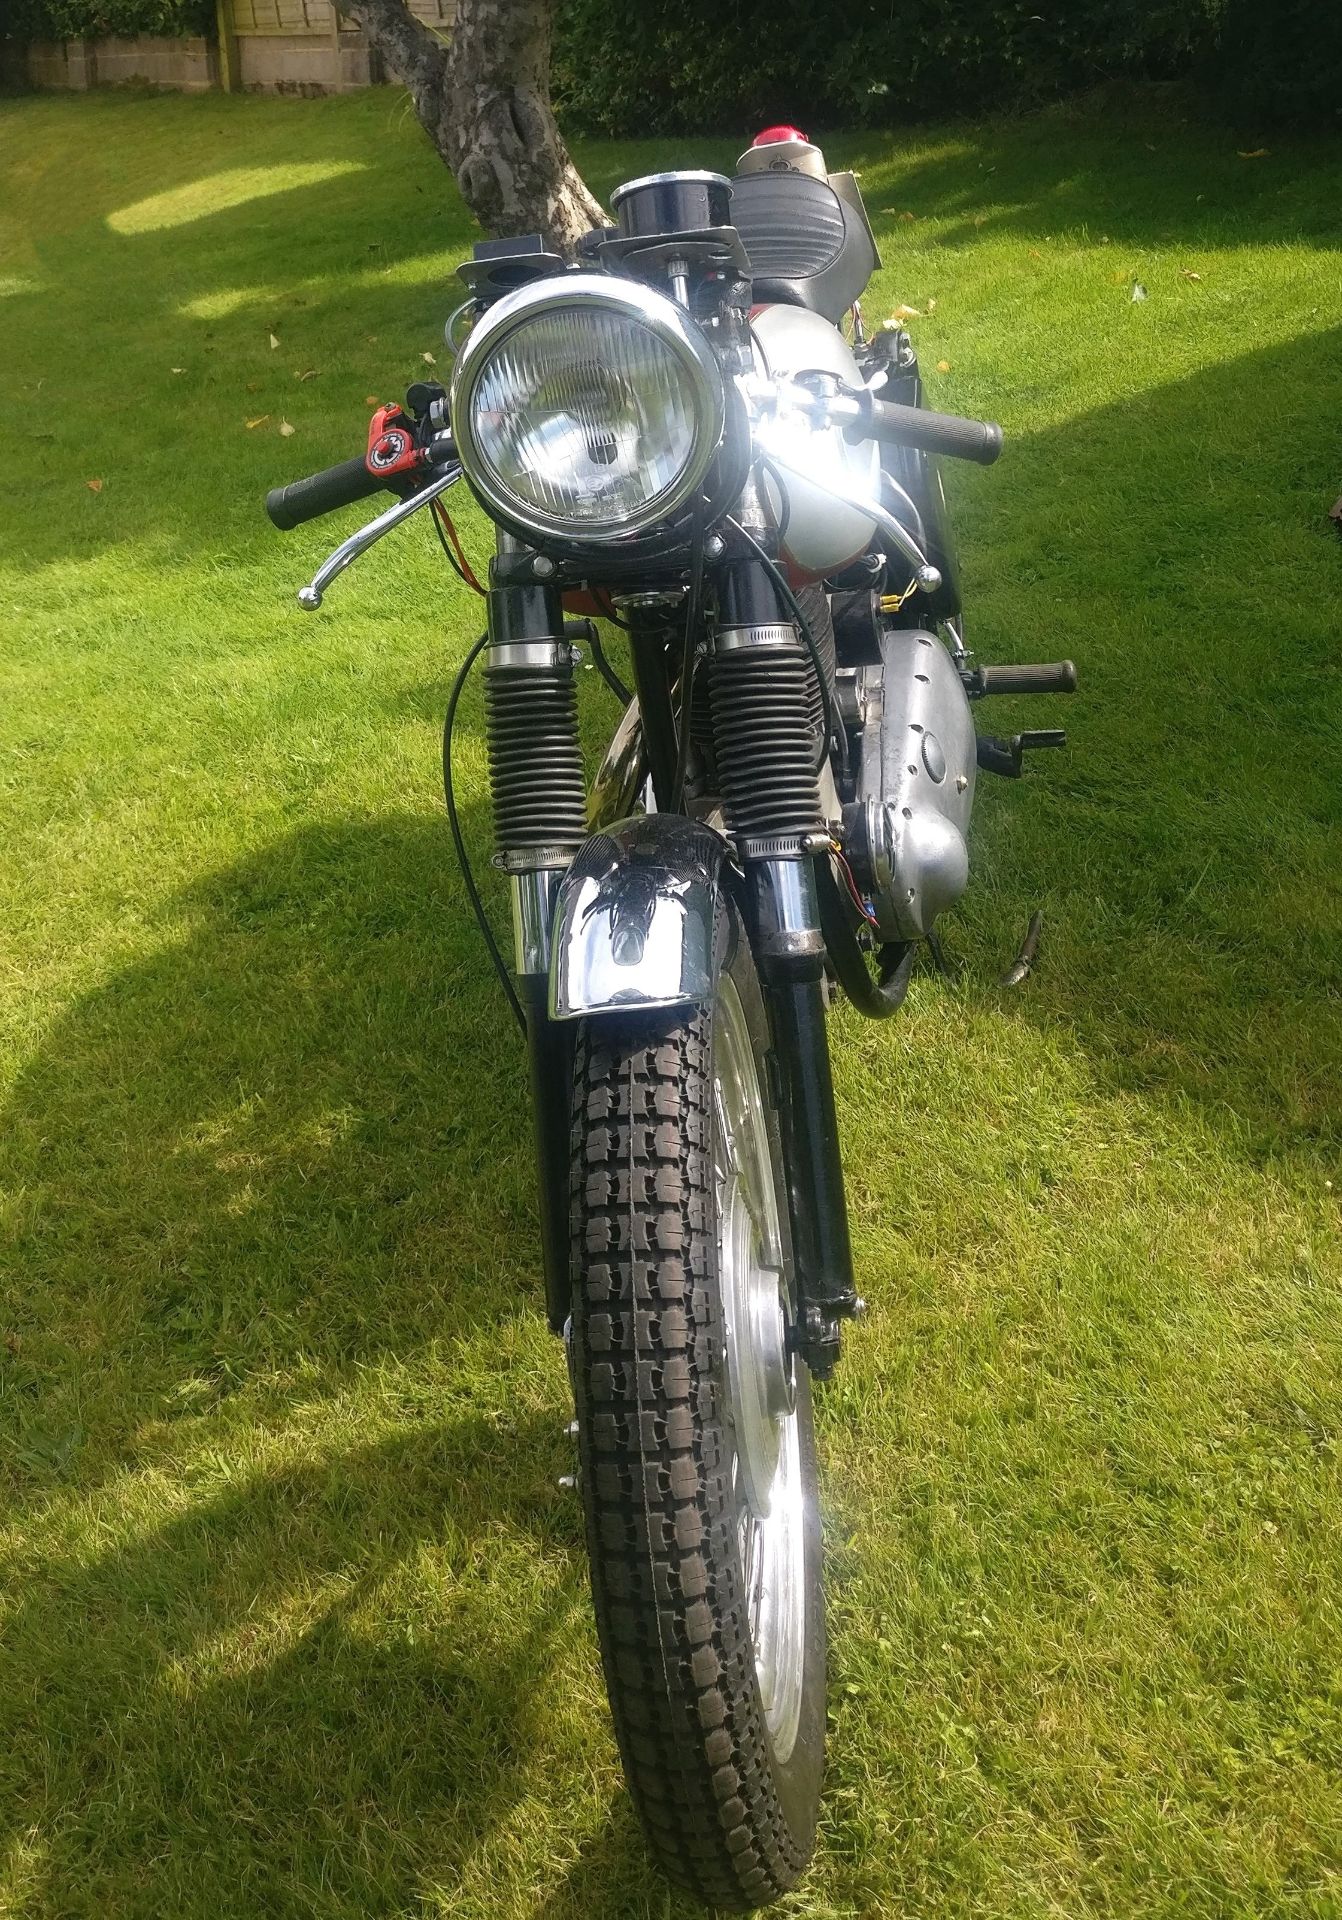 1956 BSA B31 Registration Number: 743 XWA Frame Number: TBA A fresh design for the post-war period - Image 3 of 3